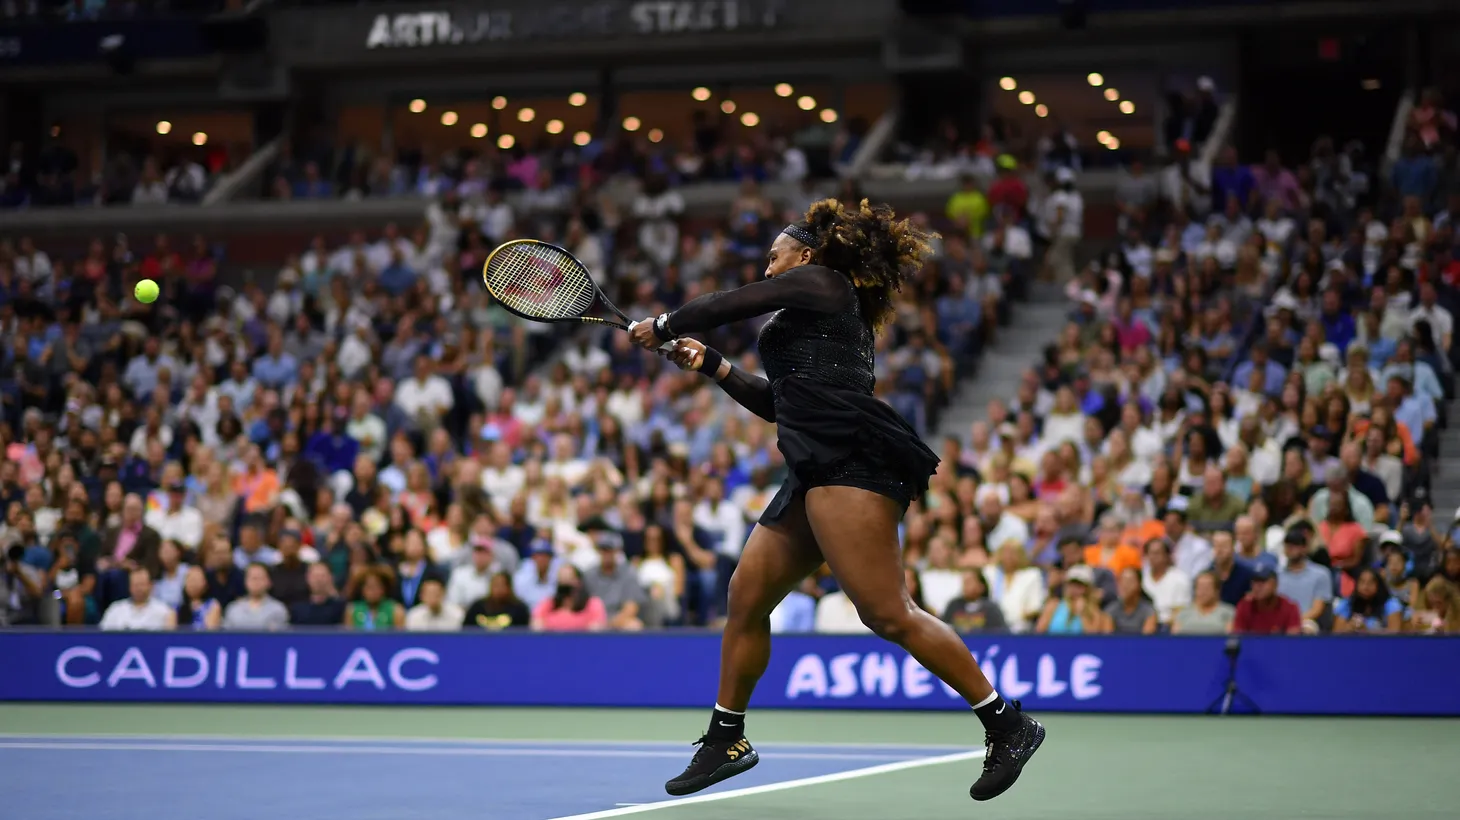 Serena Williams hits the ball in her match against Anett Kontaveit during the 2022 U.S. Open at USTA Billie Jean King National Tennis Center. August 31, 2022.